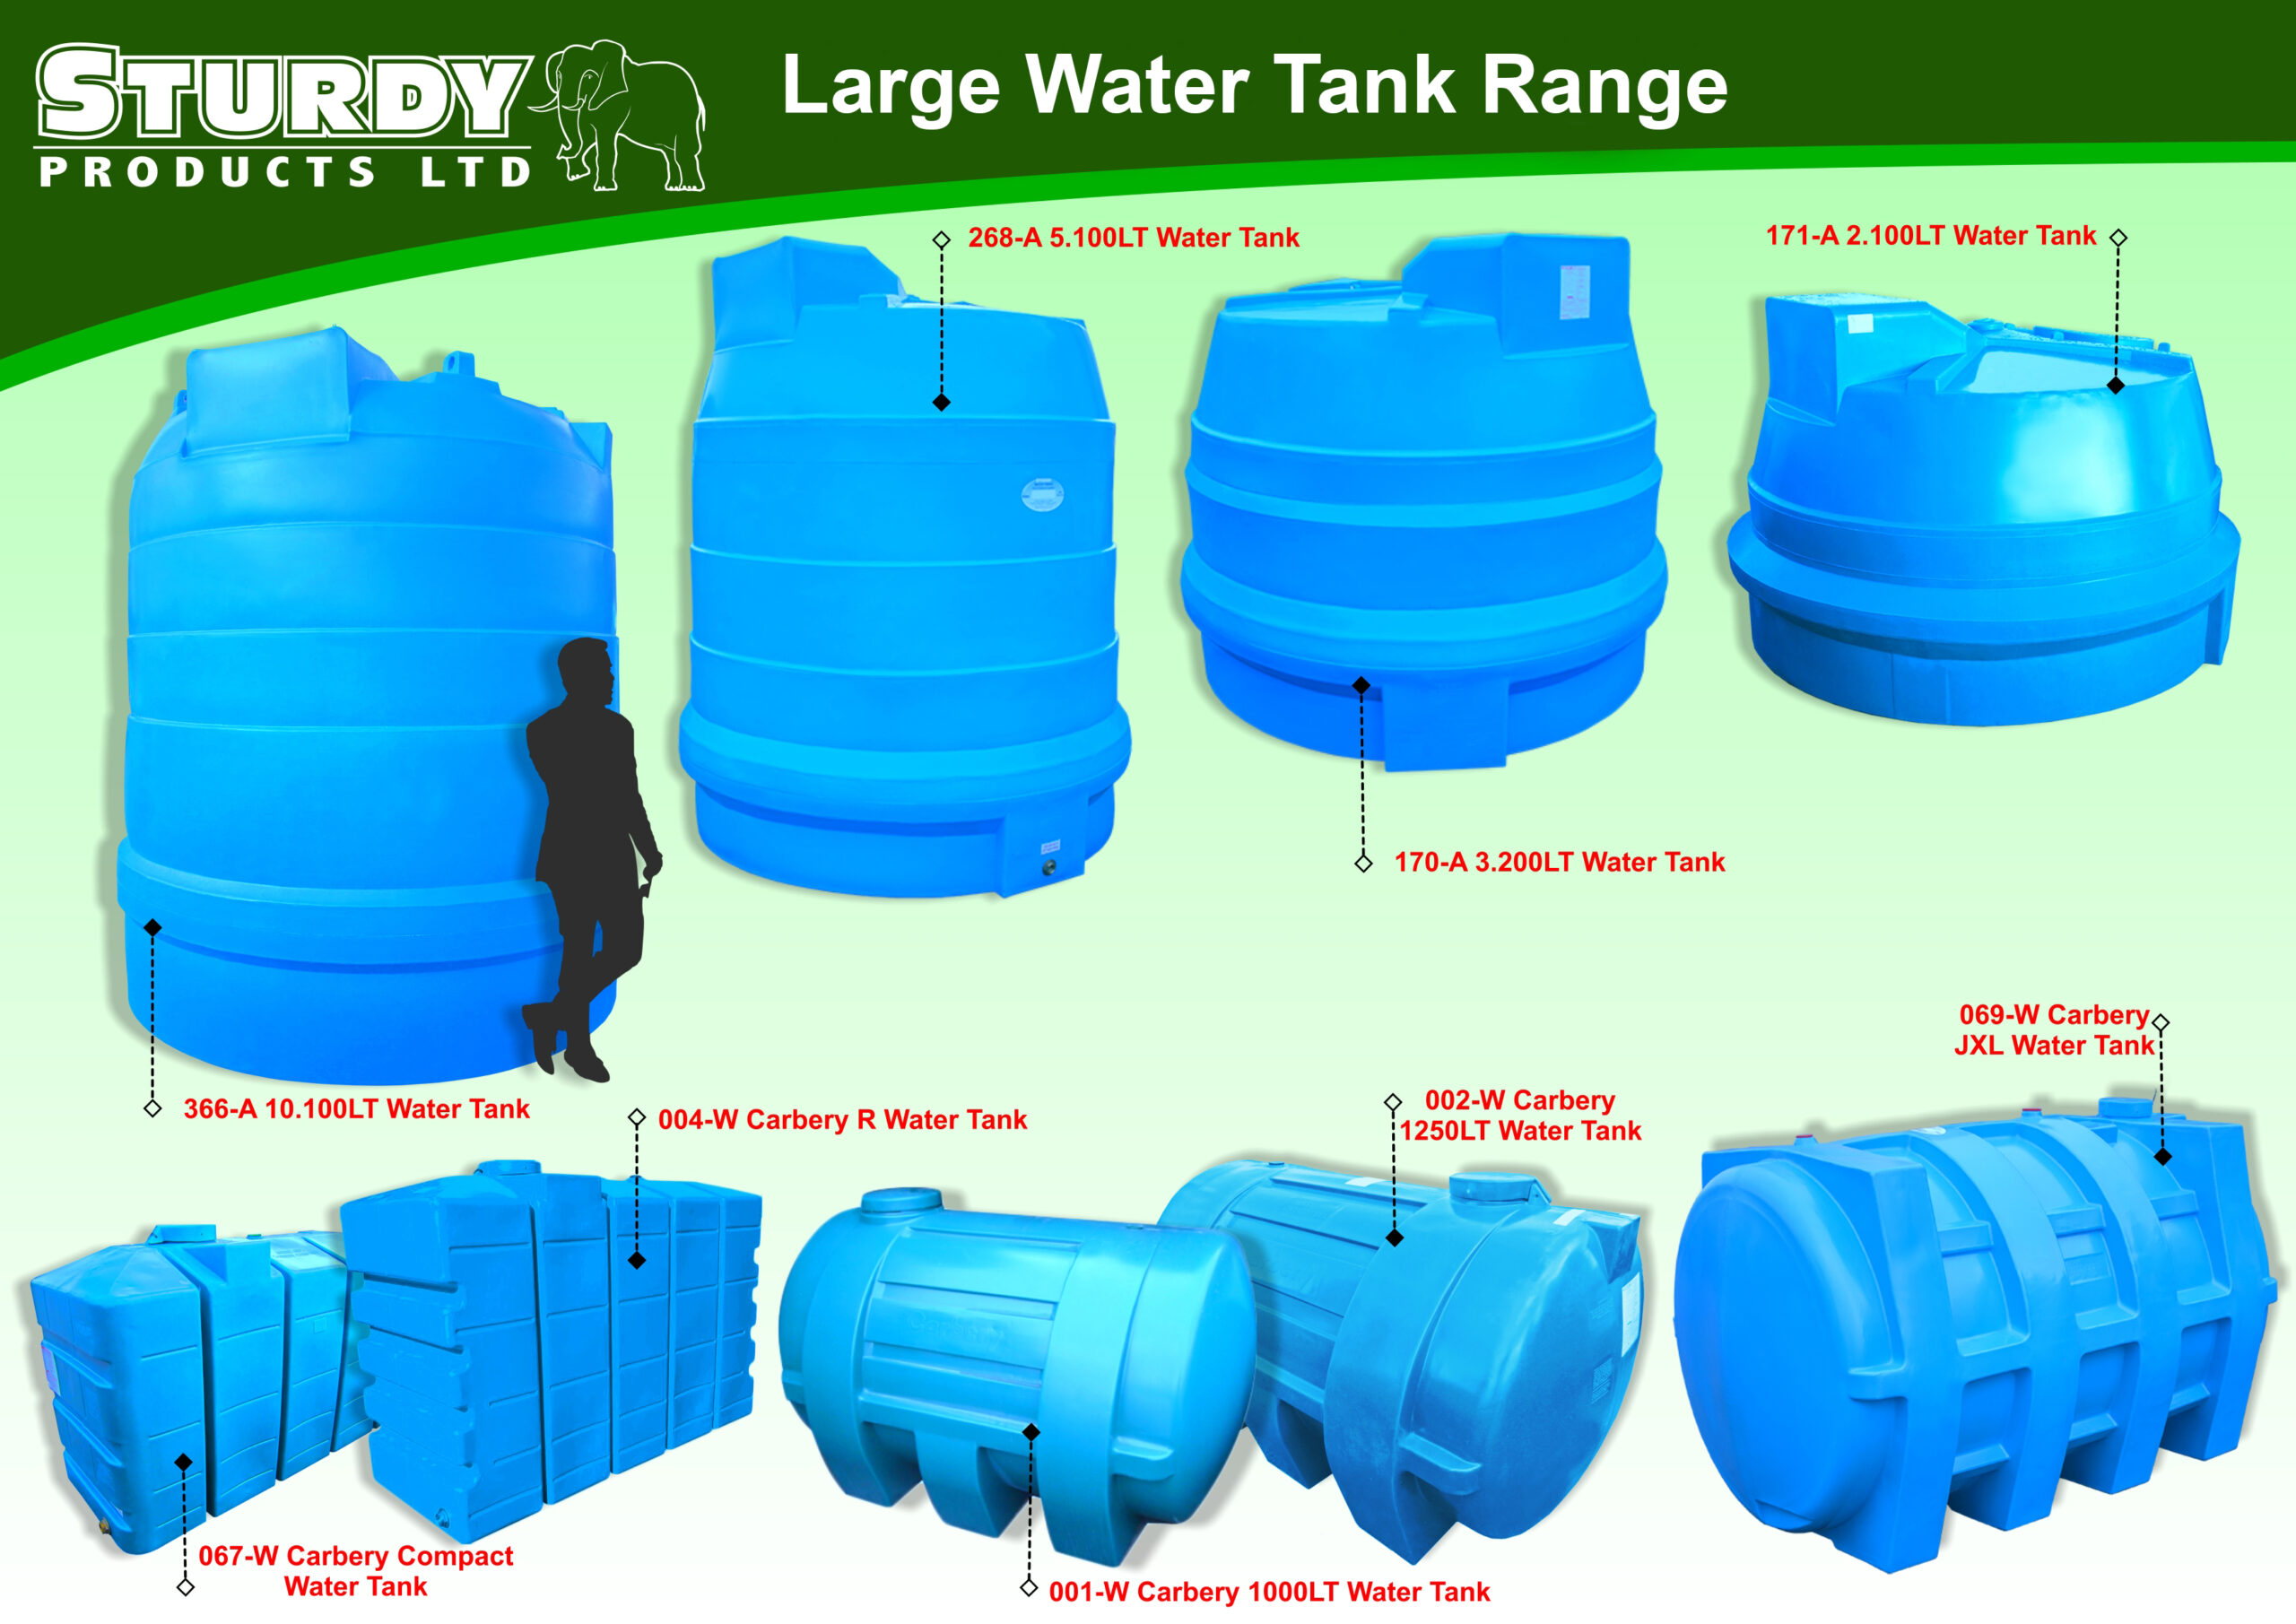 CYLINDRICAL PLASTIC WATER STORAGE TANKS: PROS